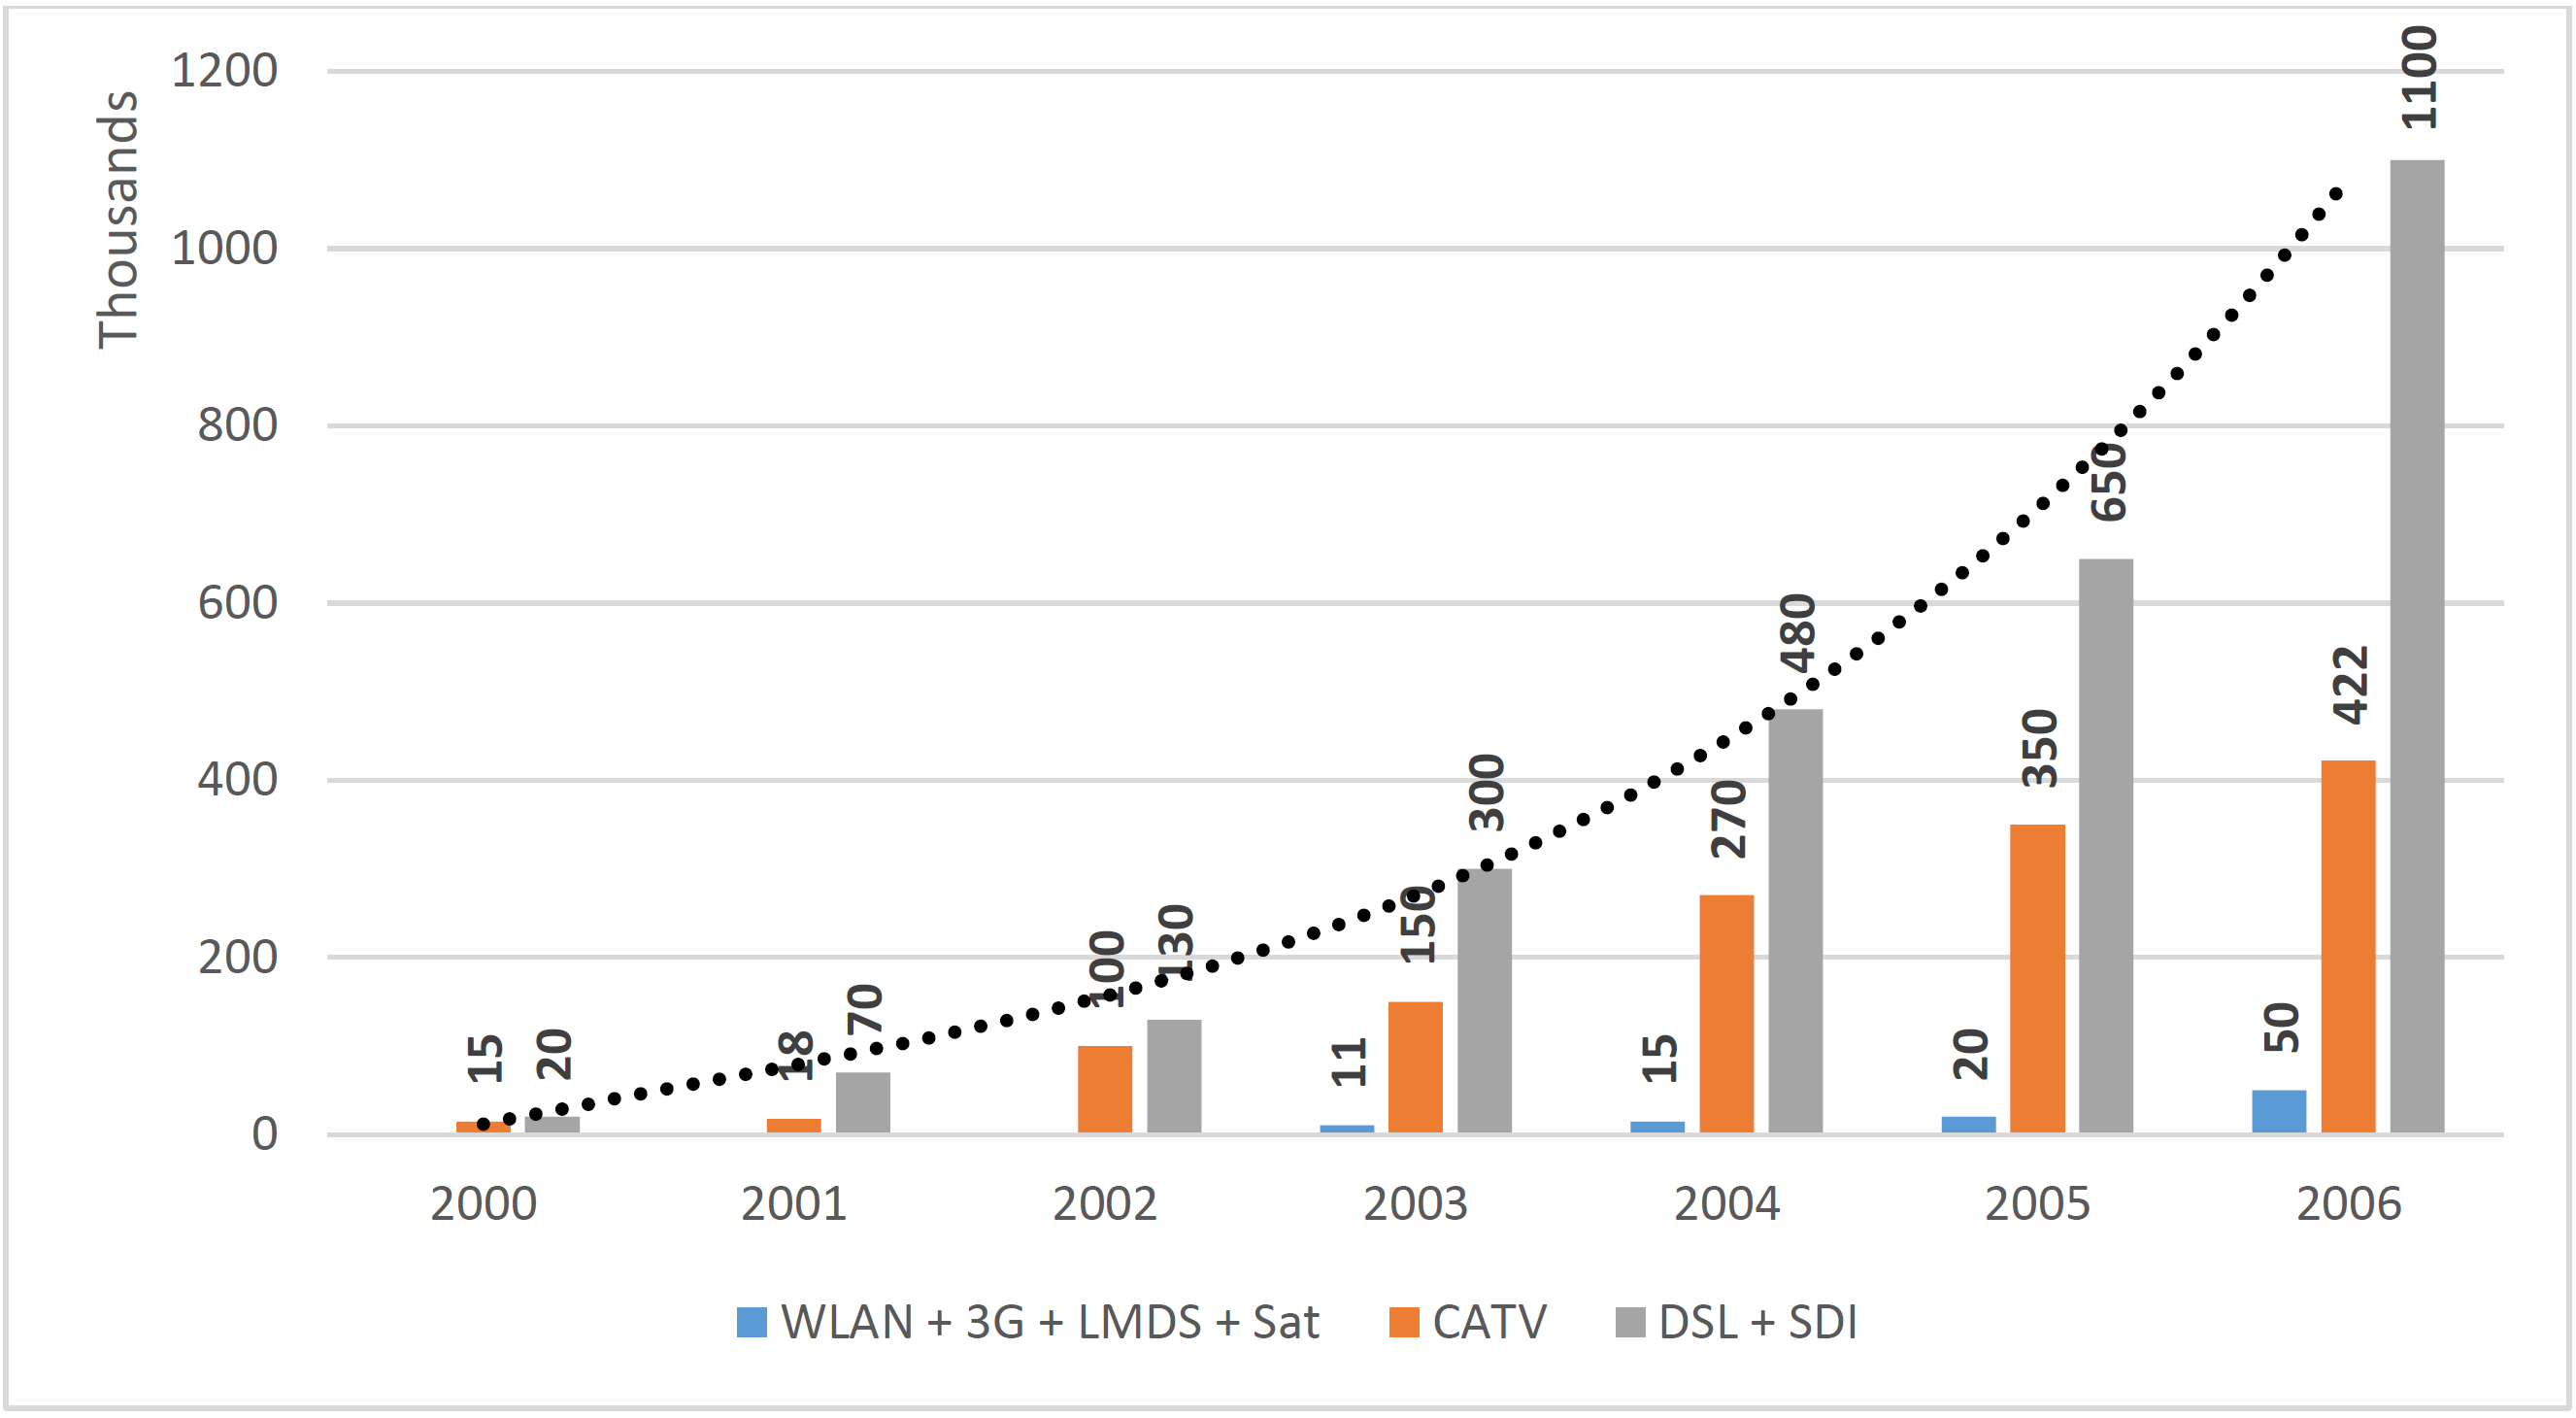 Figure 4 Usage of broadband access technologies in Poland, before and after accession EU